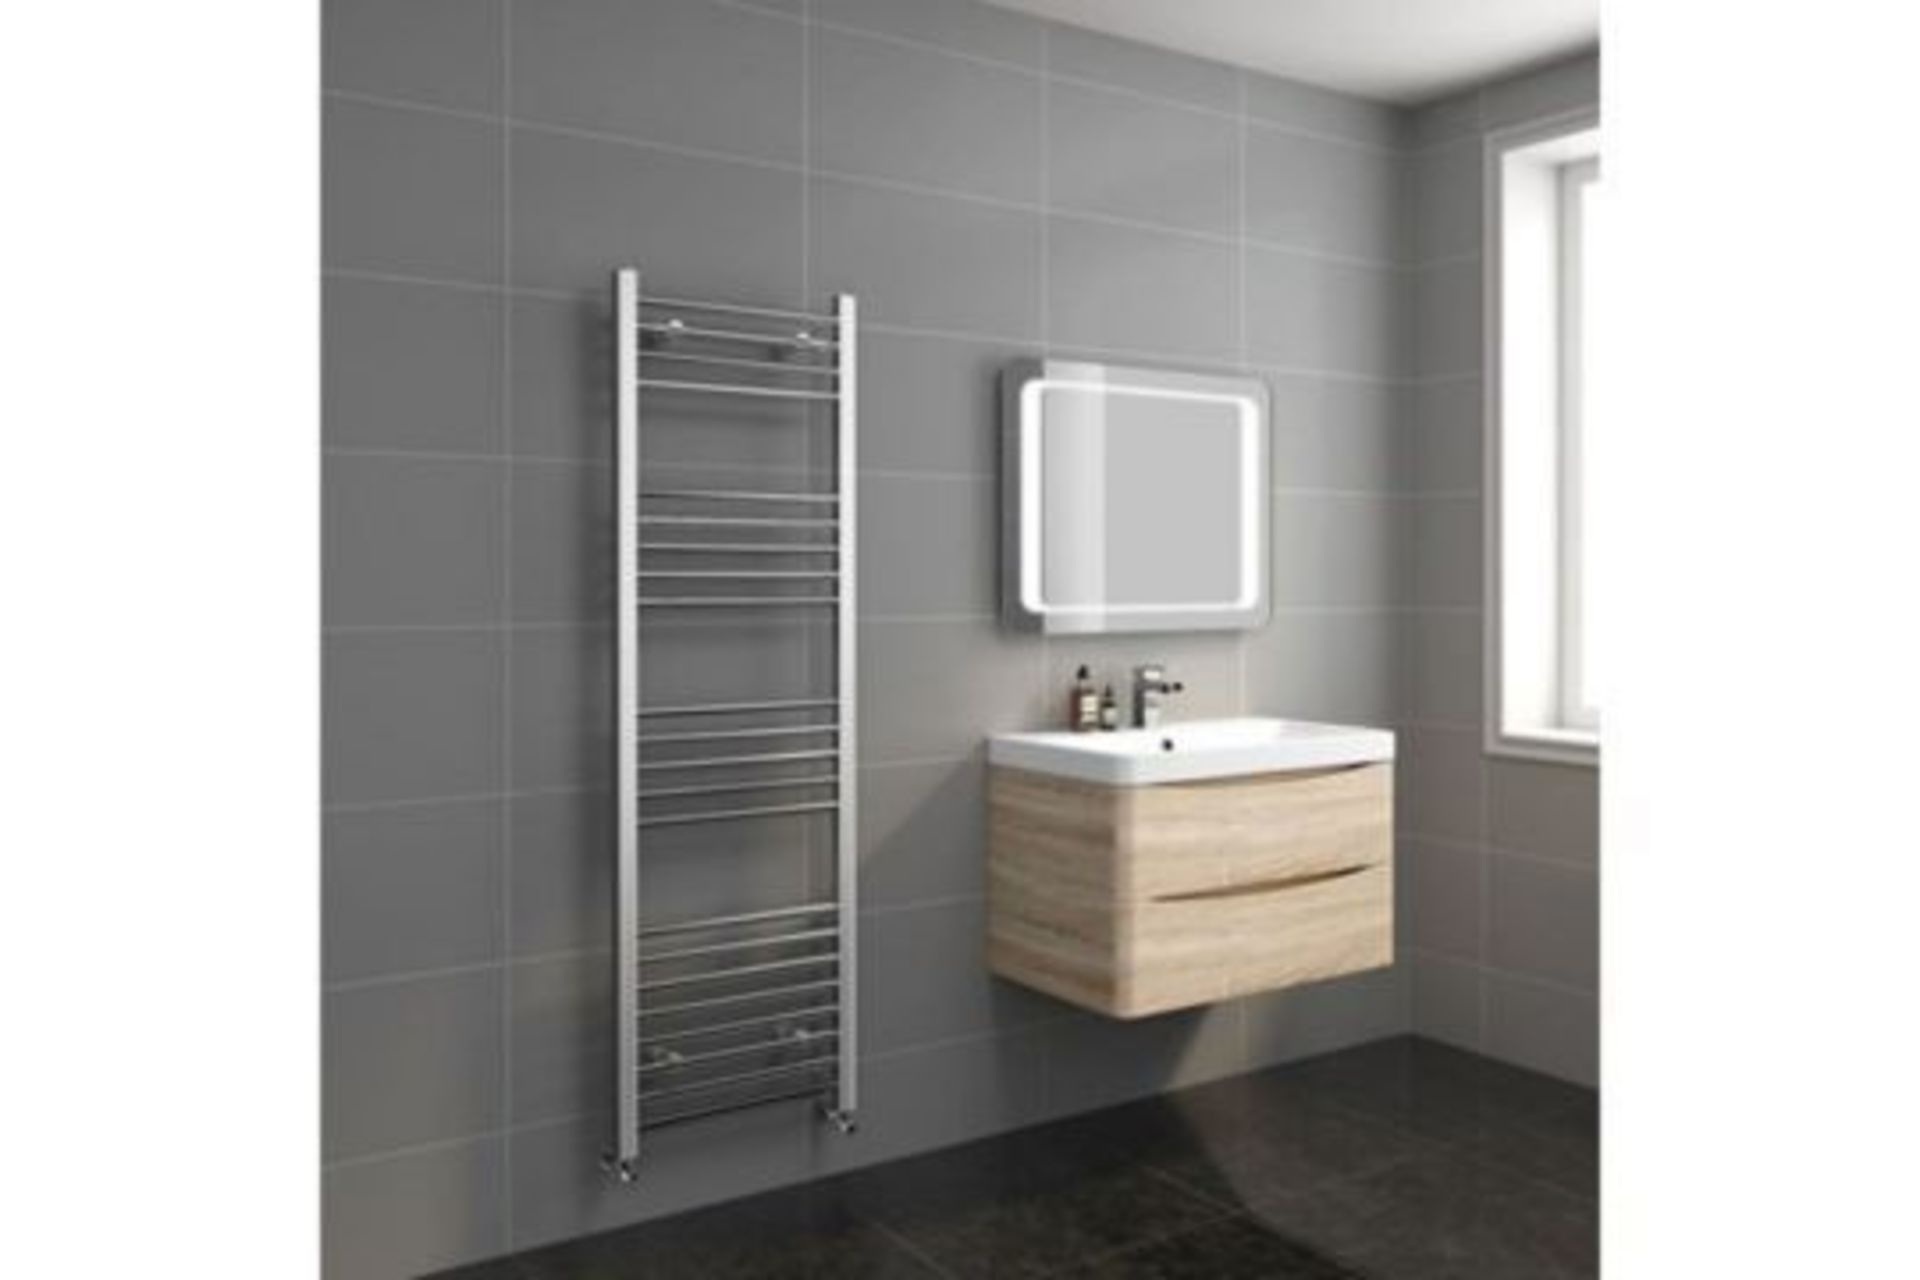 New 1600x500mm - 20mm Tubes - Chrome Flat Rail Ladder Towel Radiator.Ns1600500.Made From Chrome... - Image 2 of 2